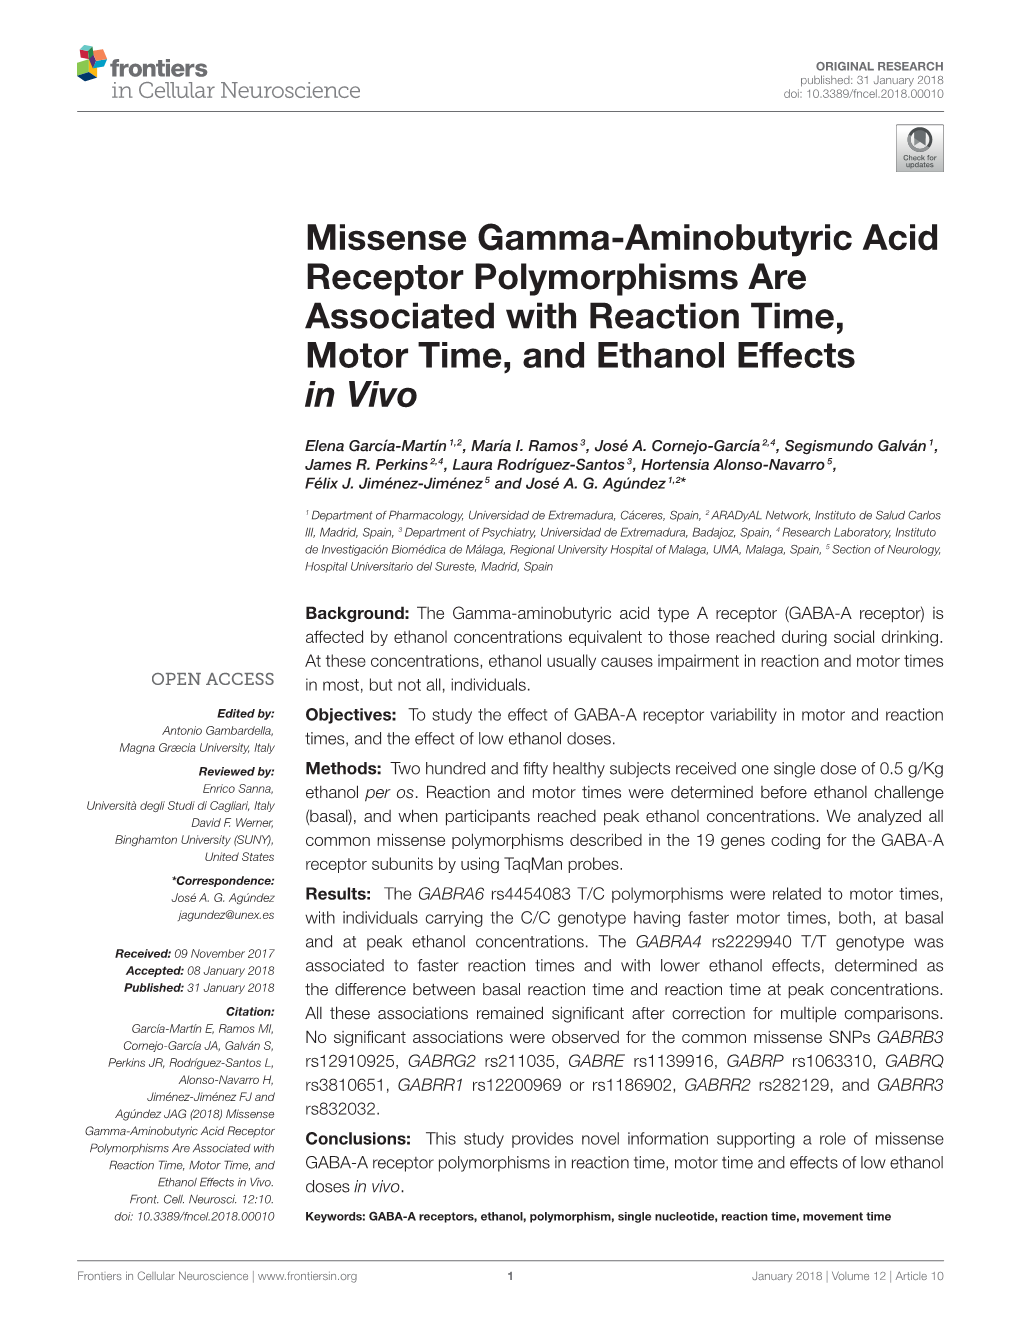 Missense Gamma-Aminobutyric Acid Receptor Polymorphisms Are Associated with Reaction Time, Motor Time, and Ethanol Effects in Vivo